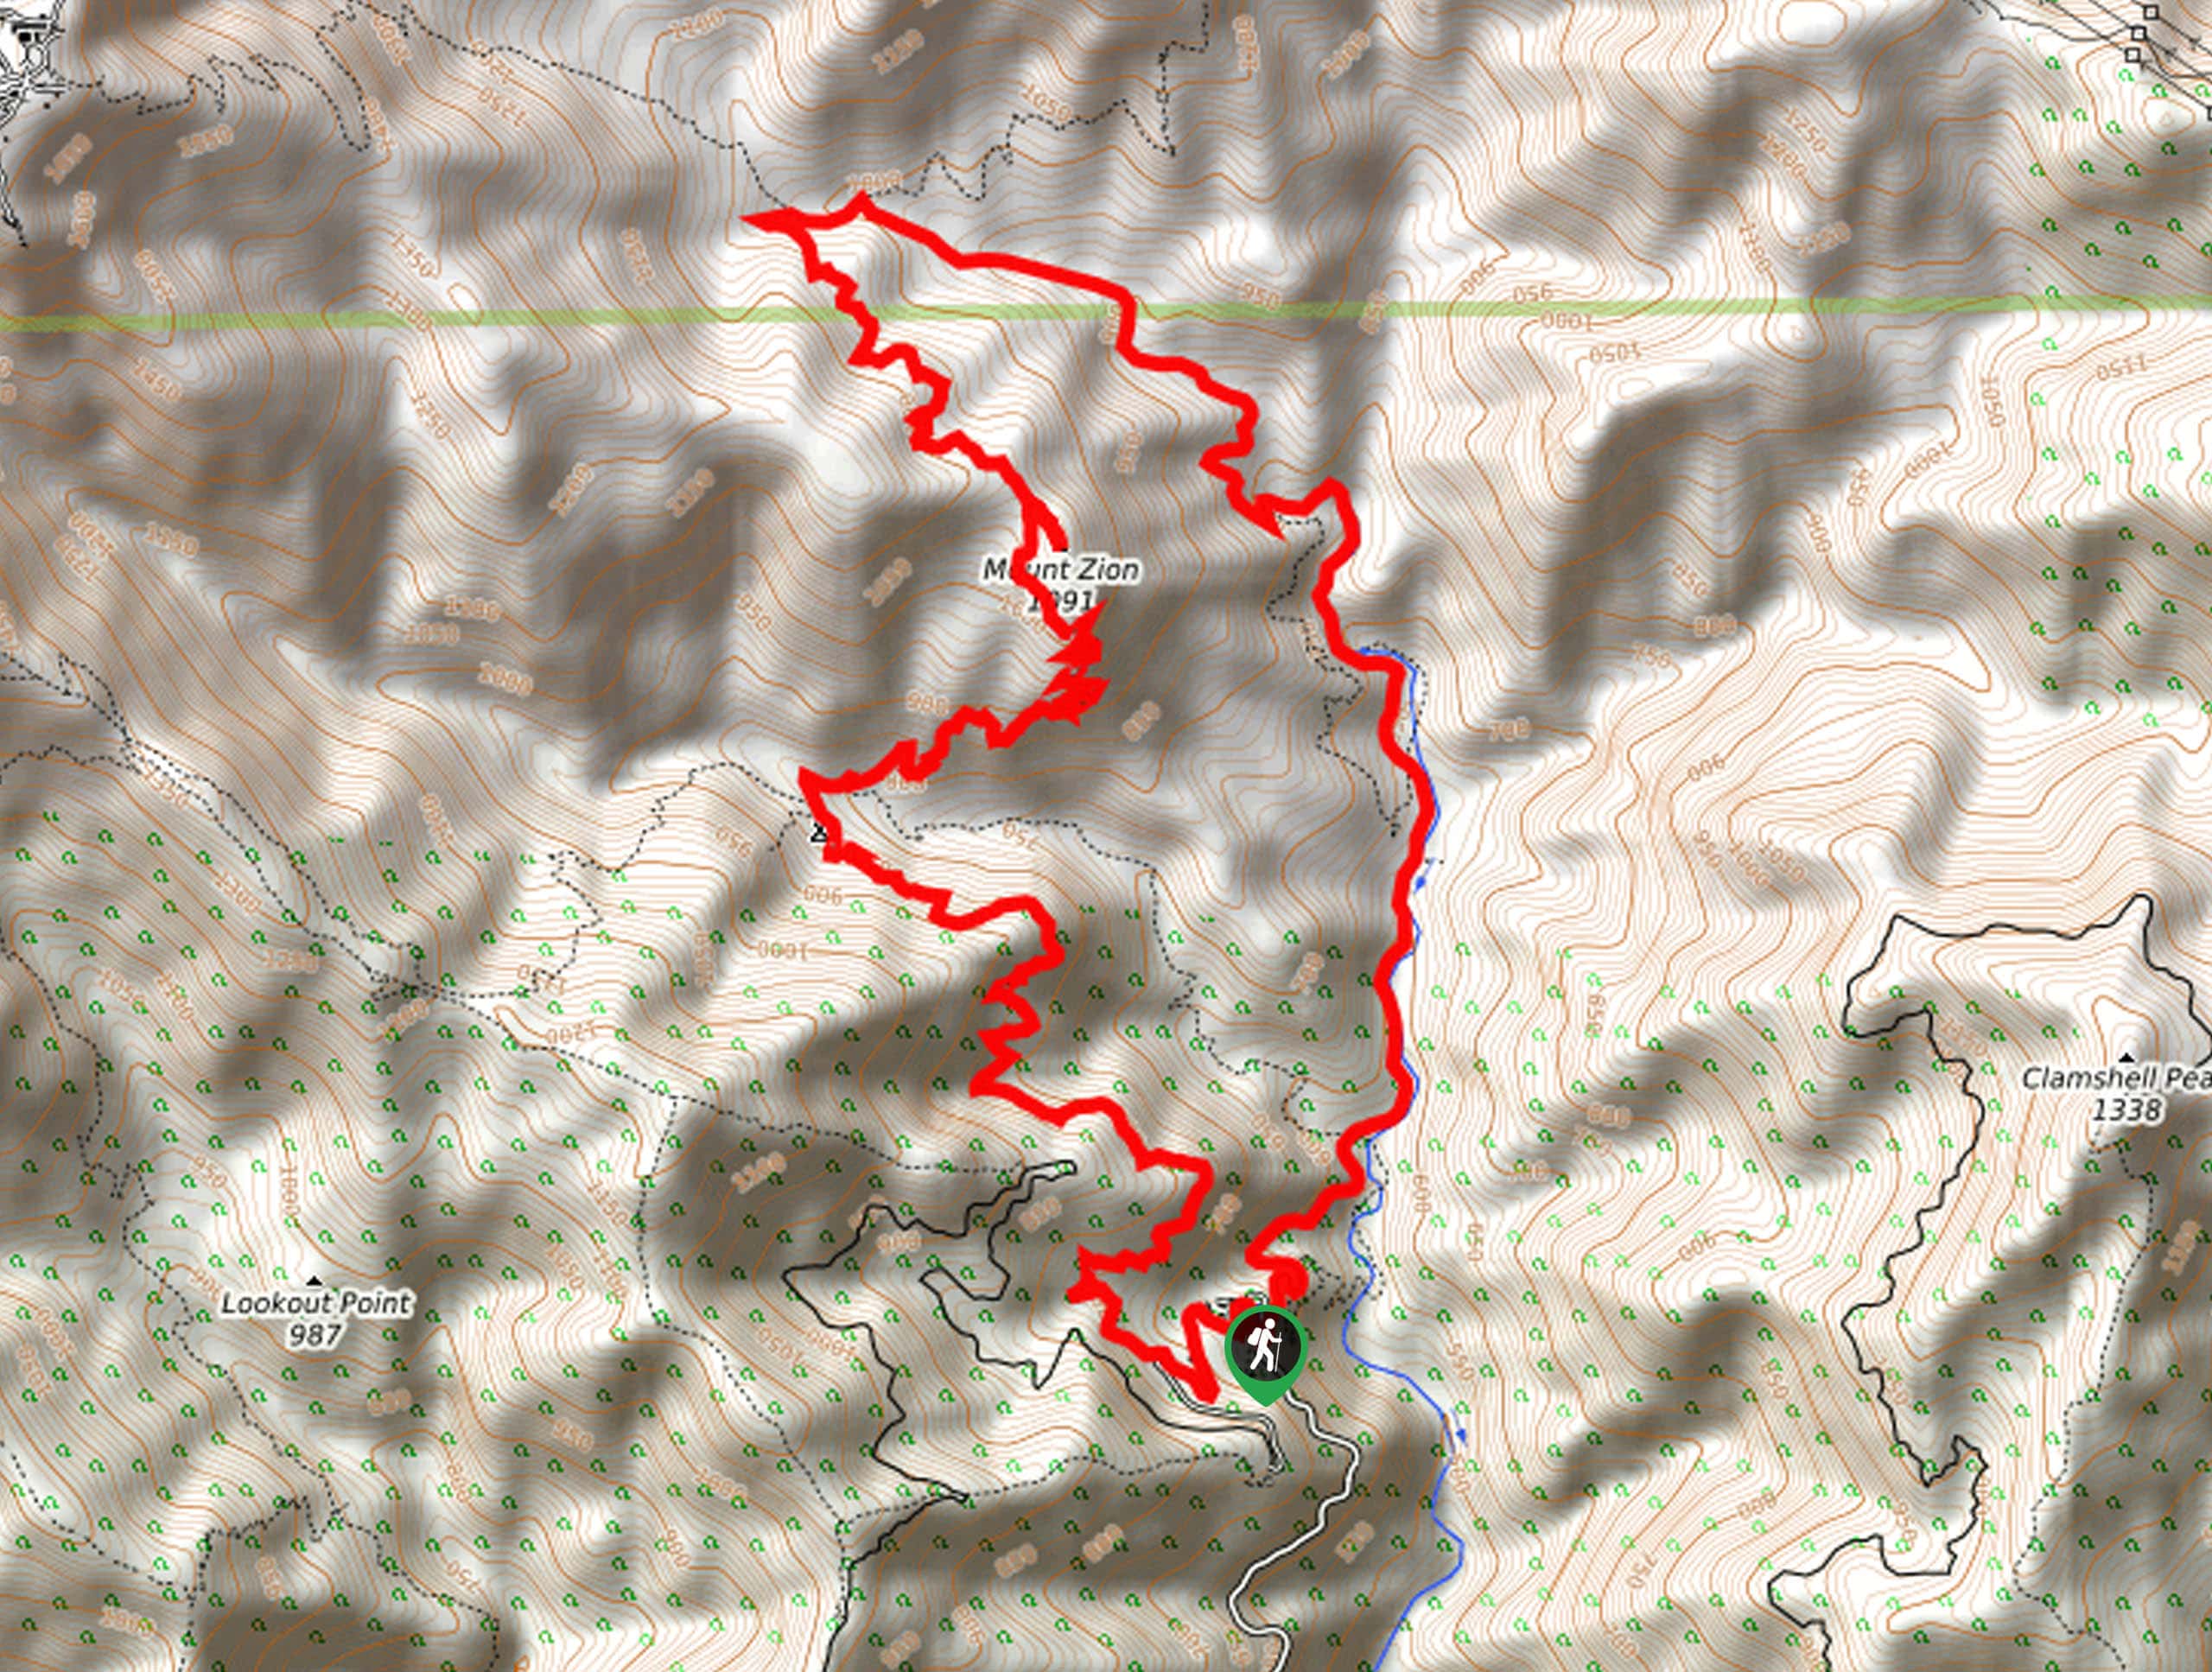 Mount Zion Loop Trail Map